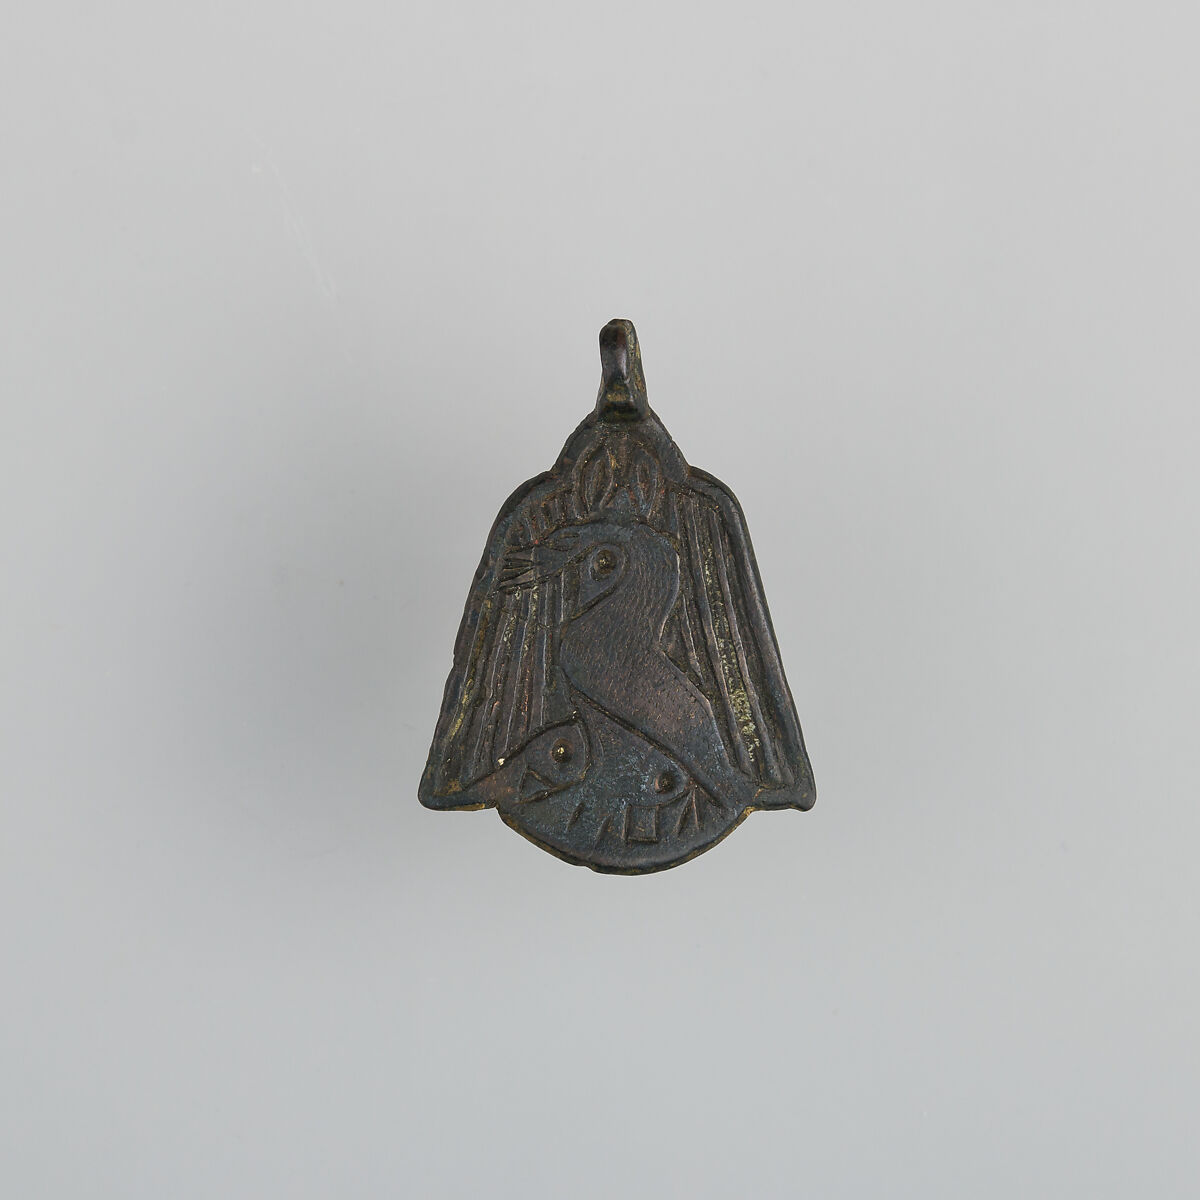 Badge or Harness Pendant, Copper, possibly Spanish 